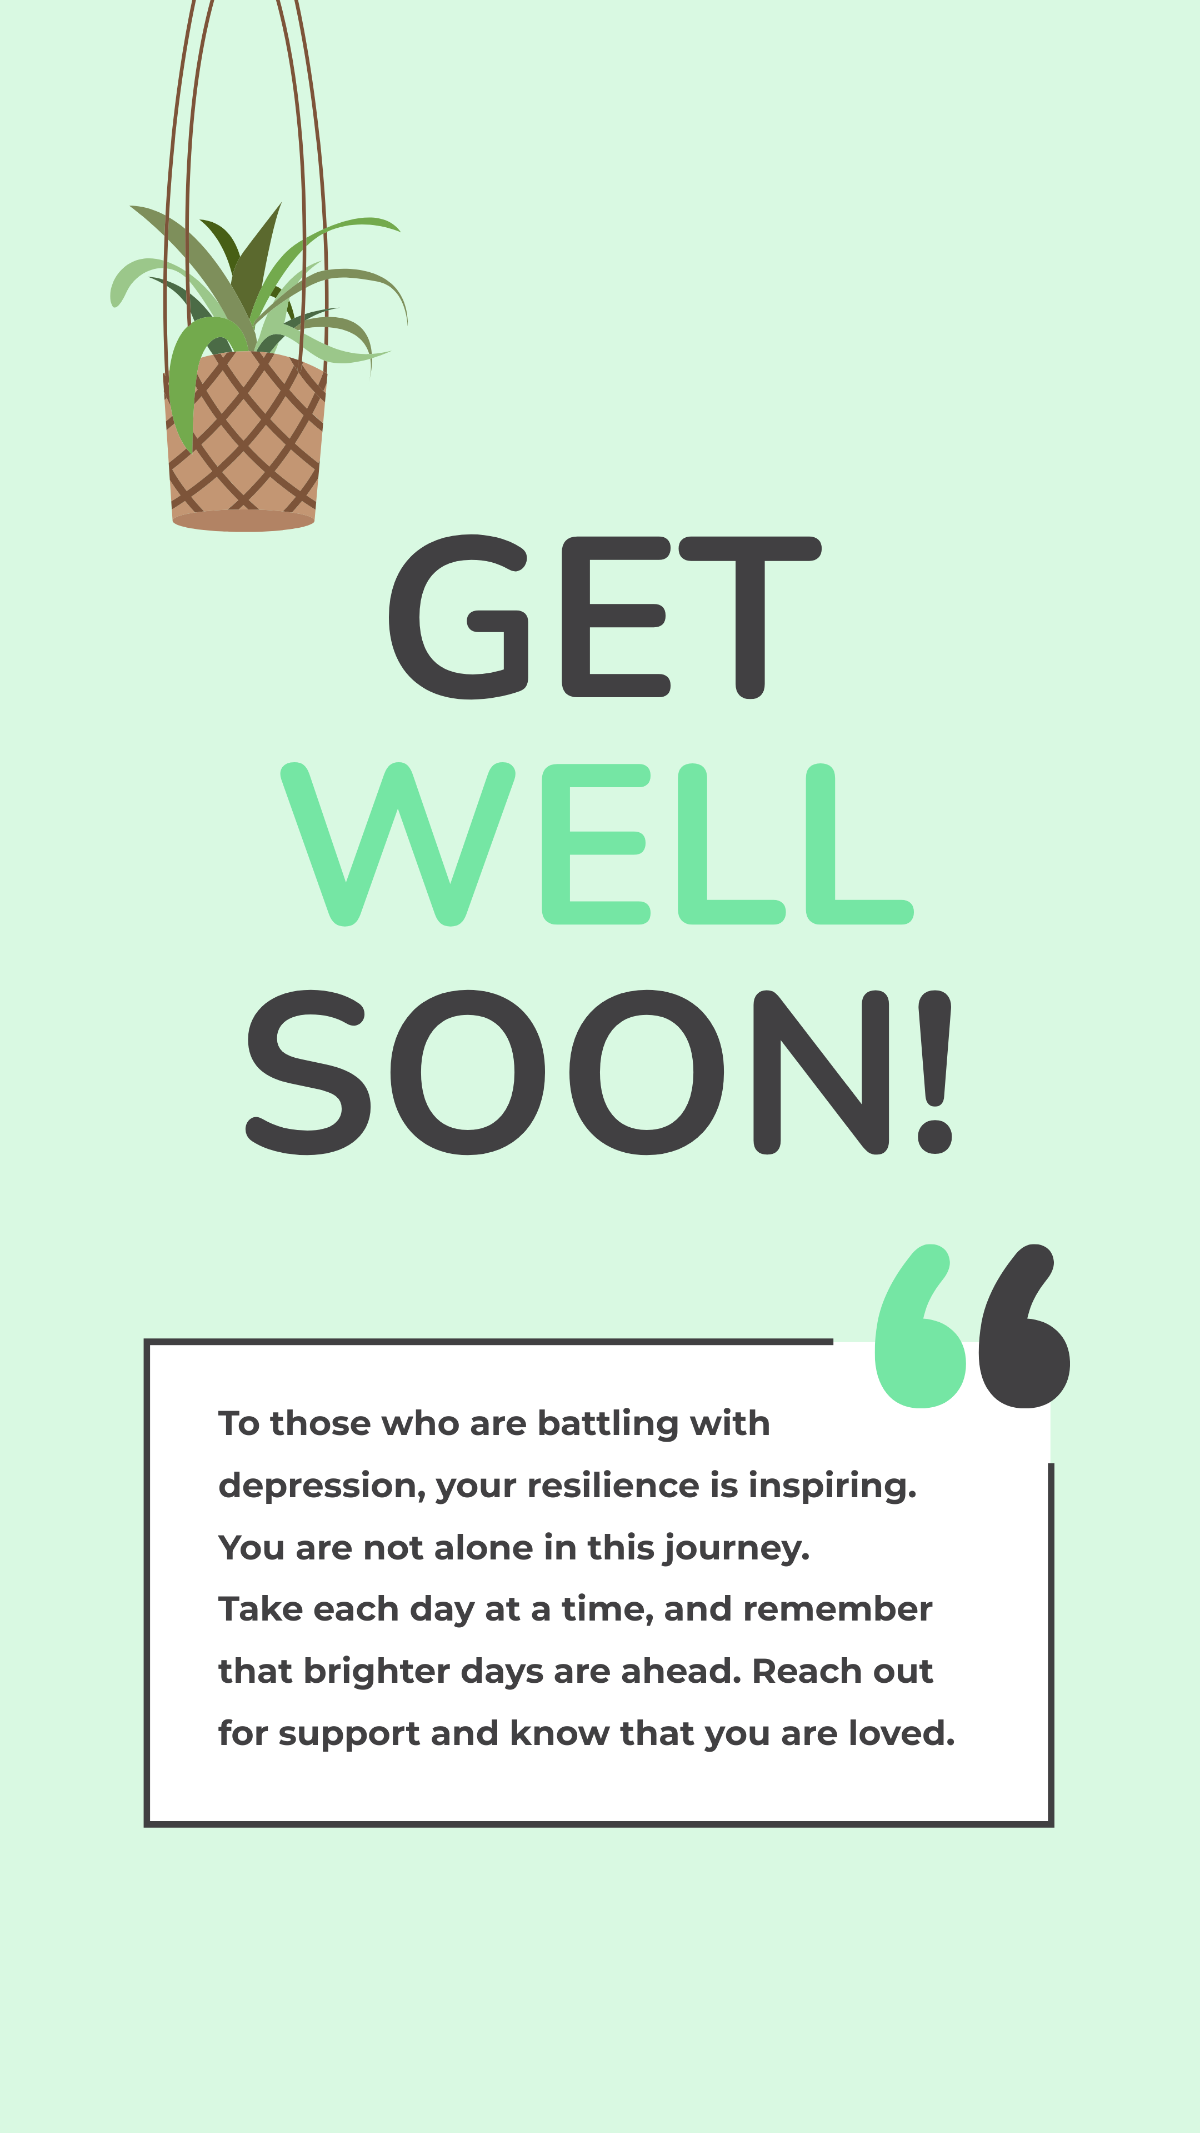 Get Well Soon Message For Depression